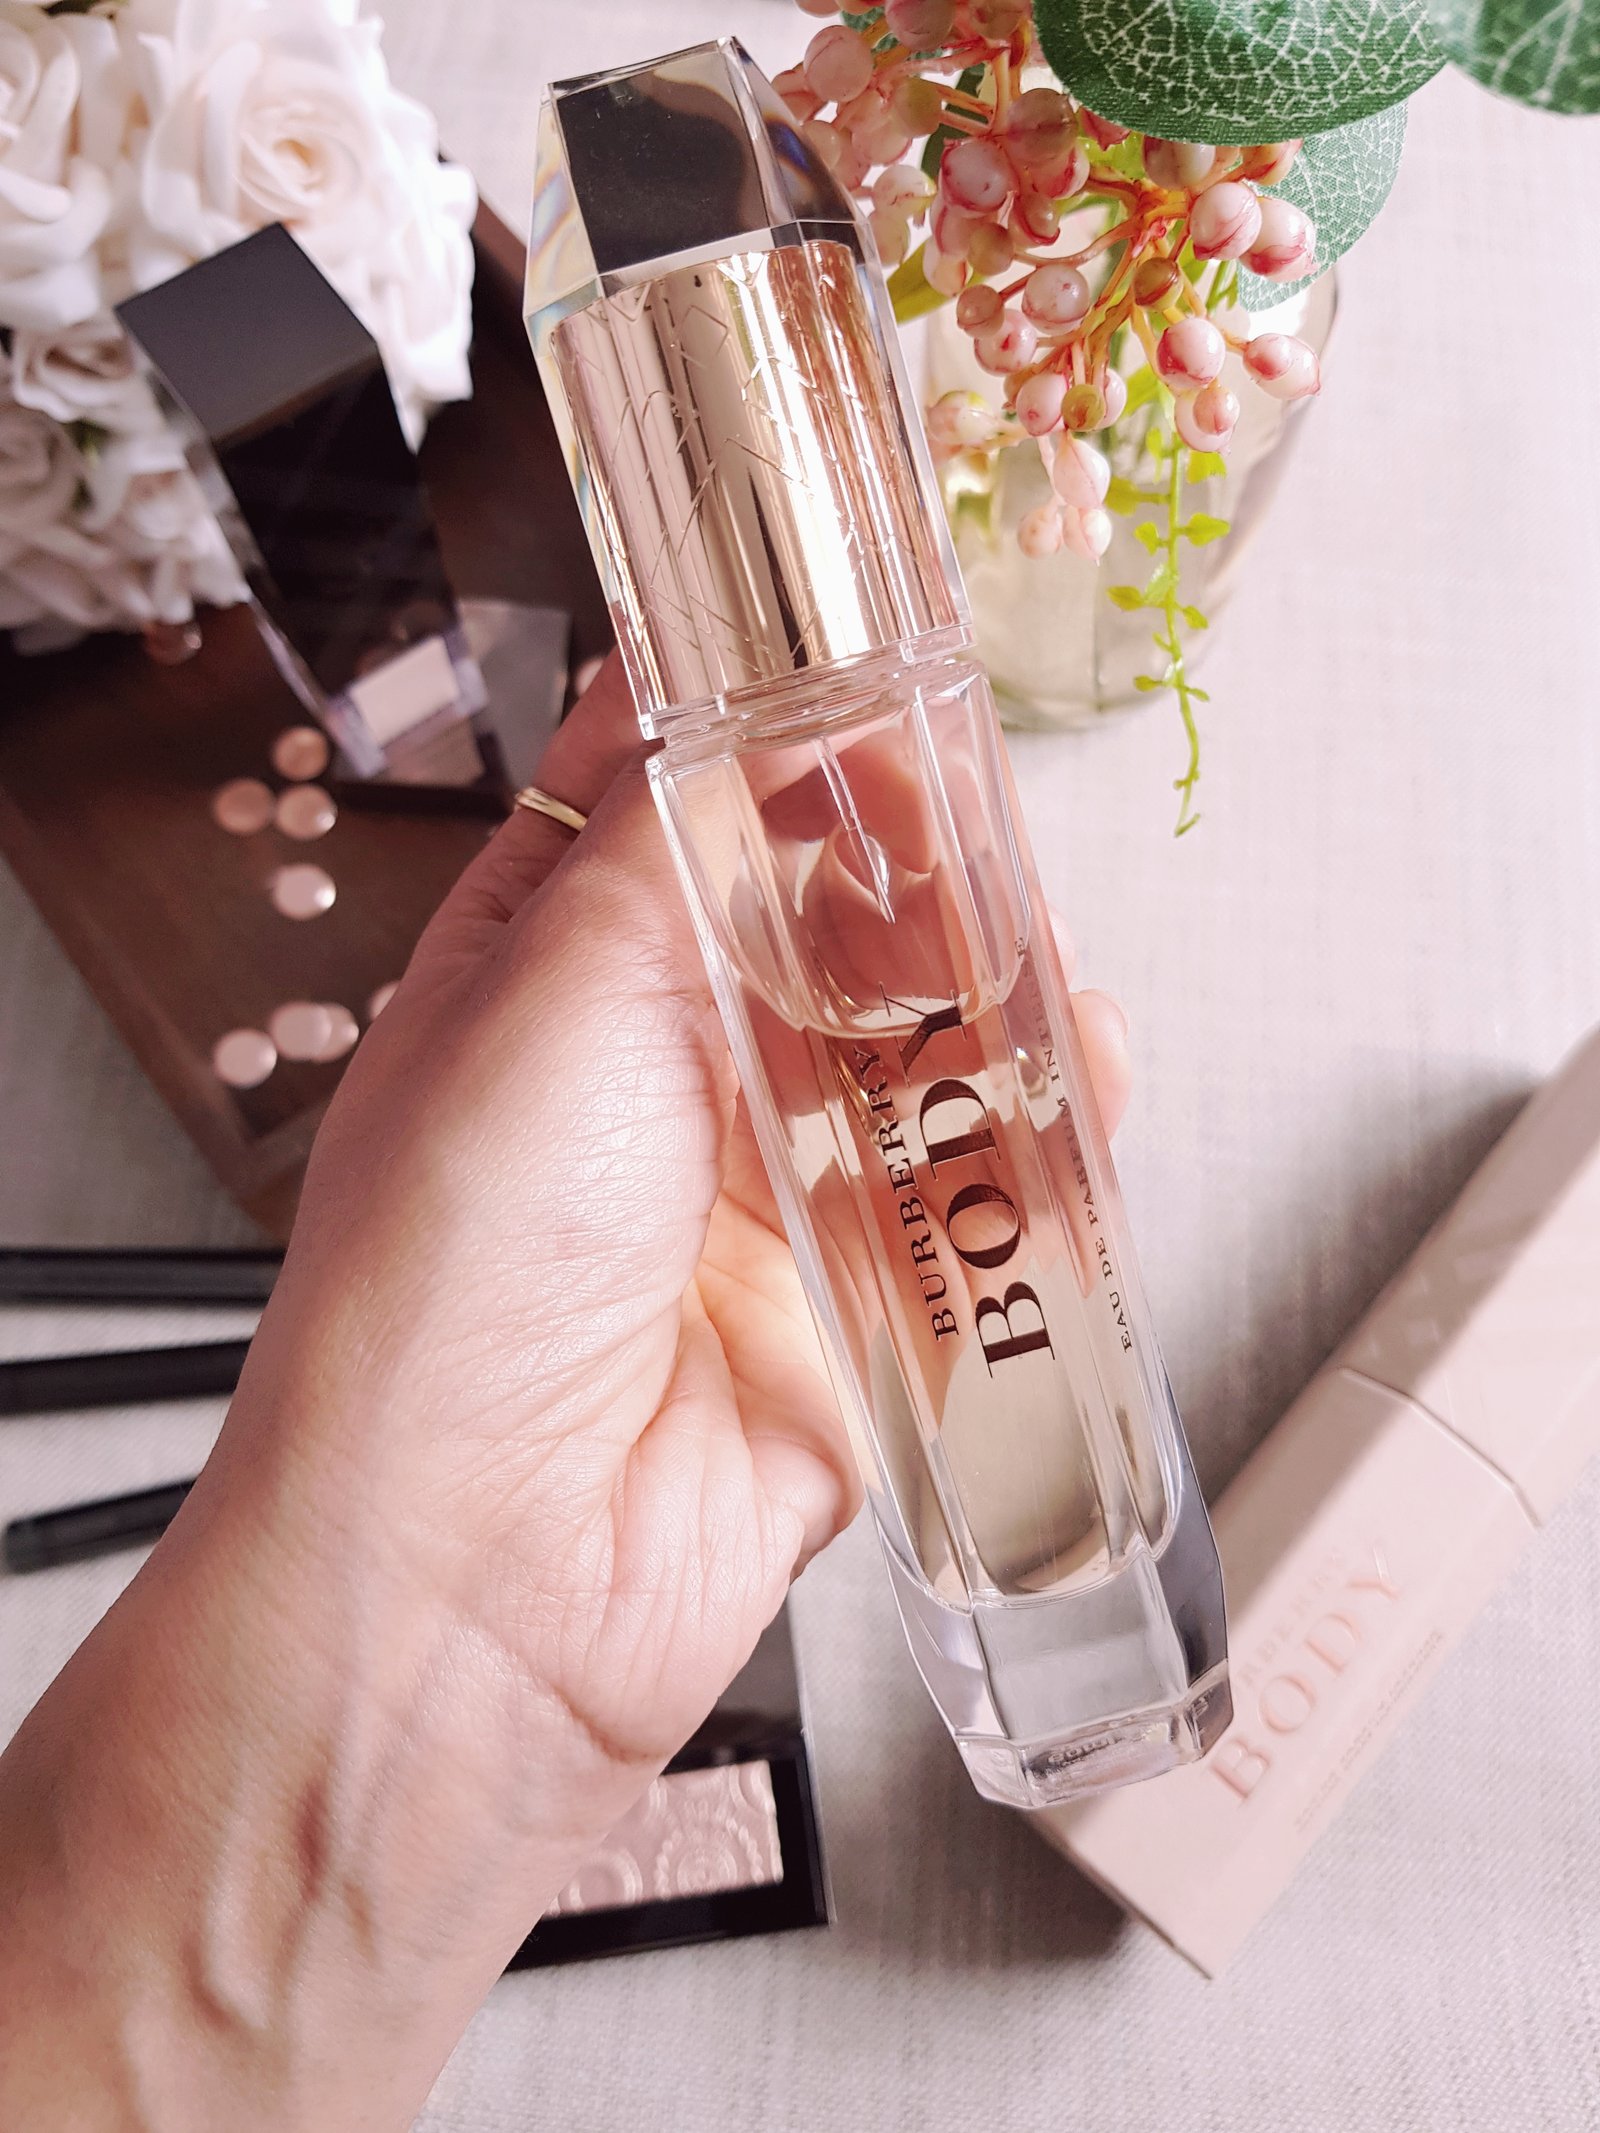 burberry body intense perfume review